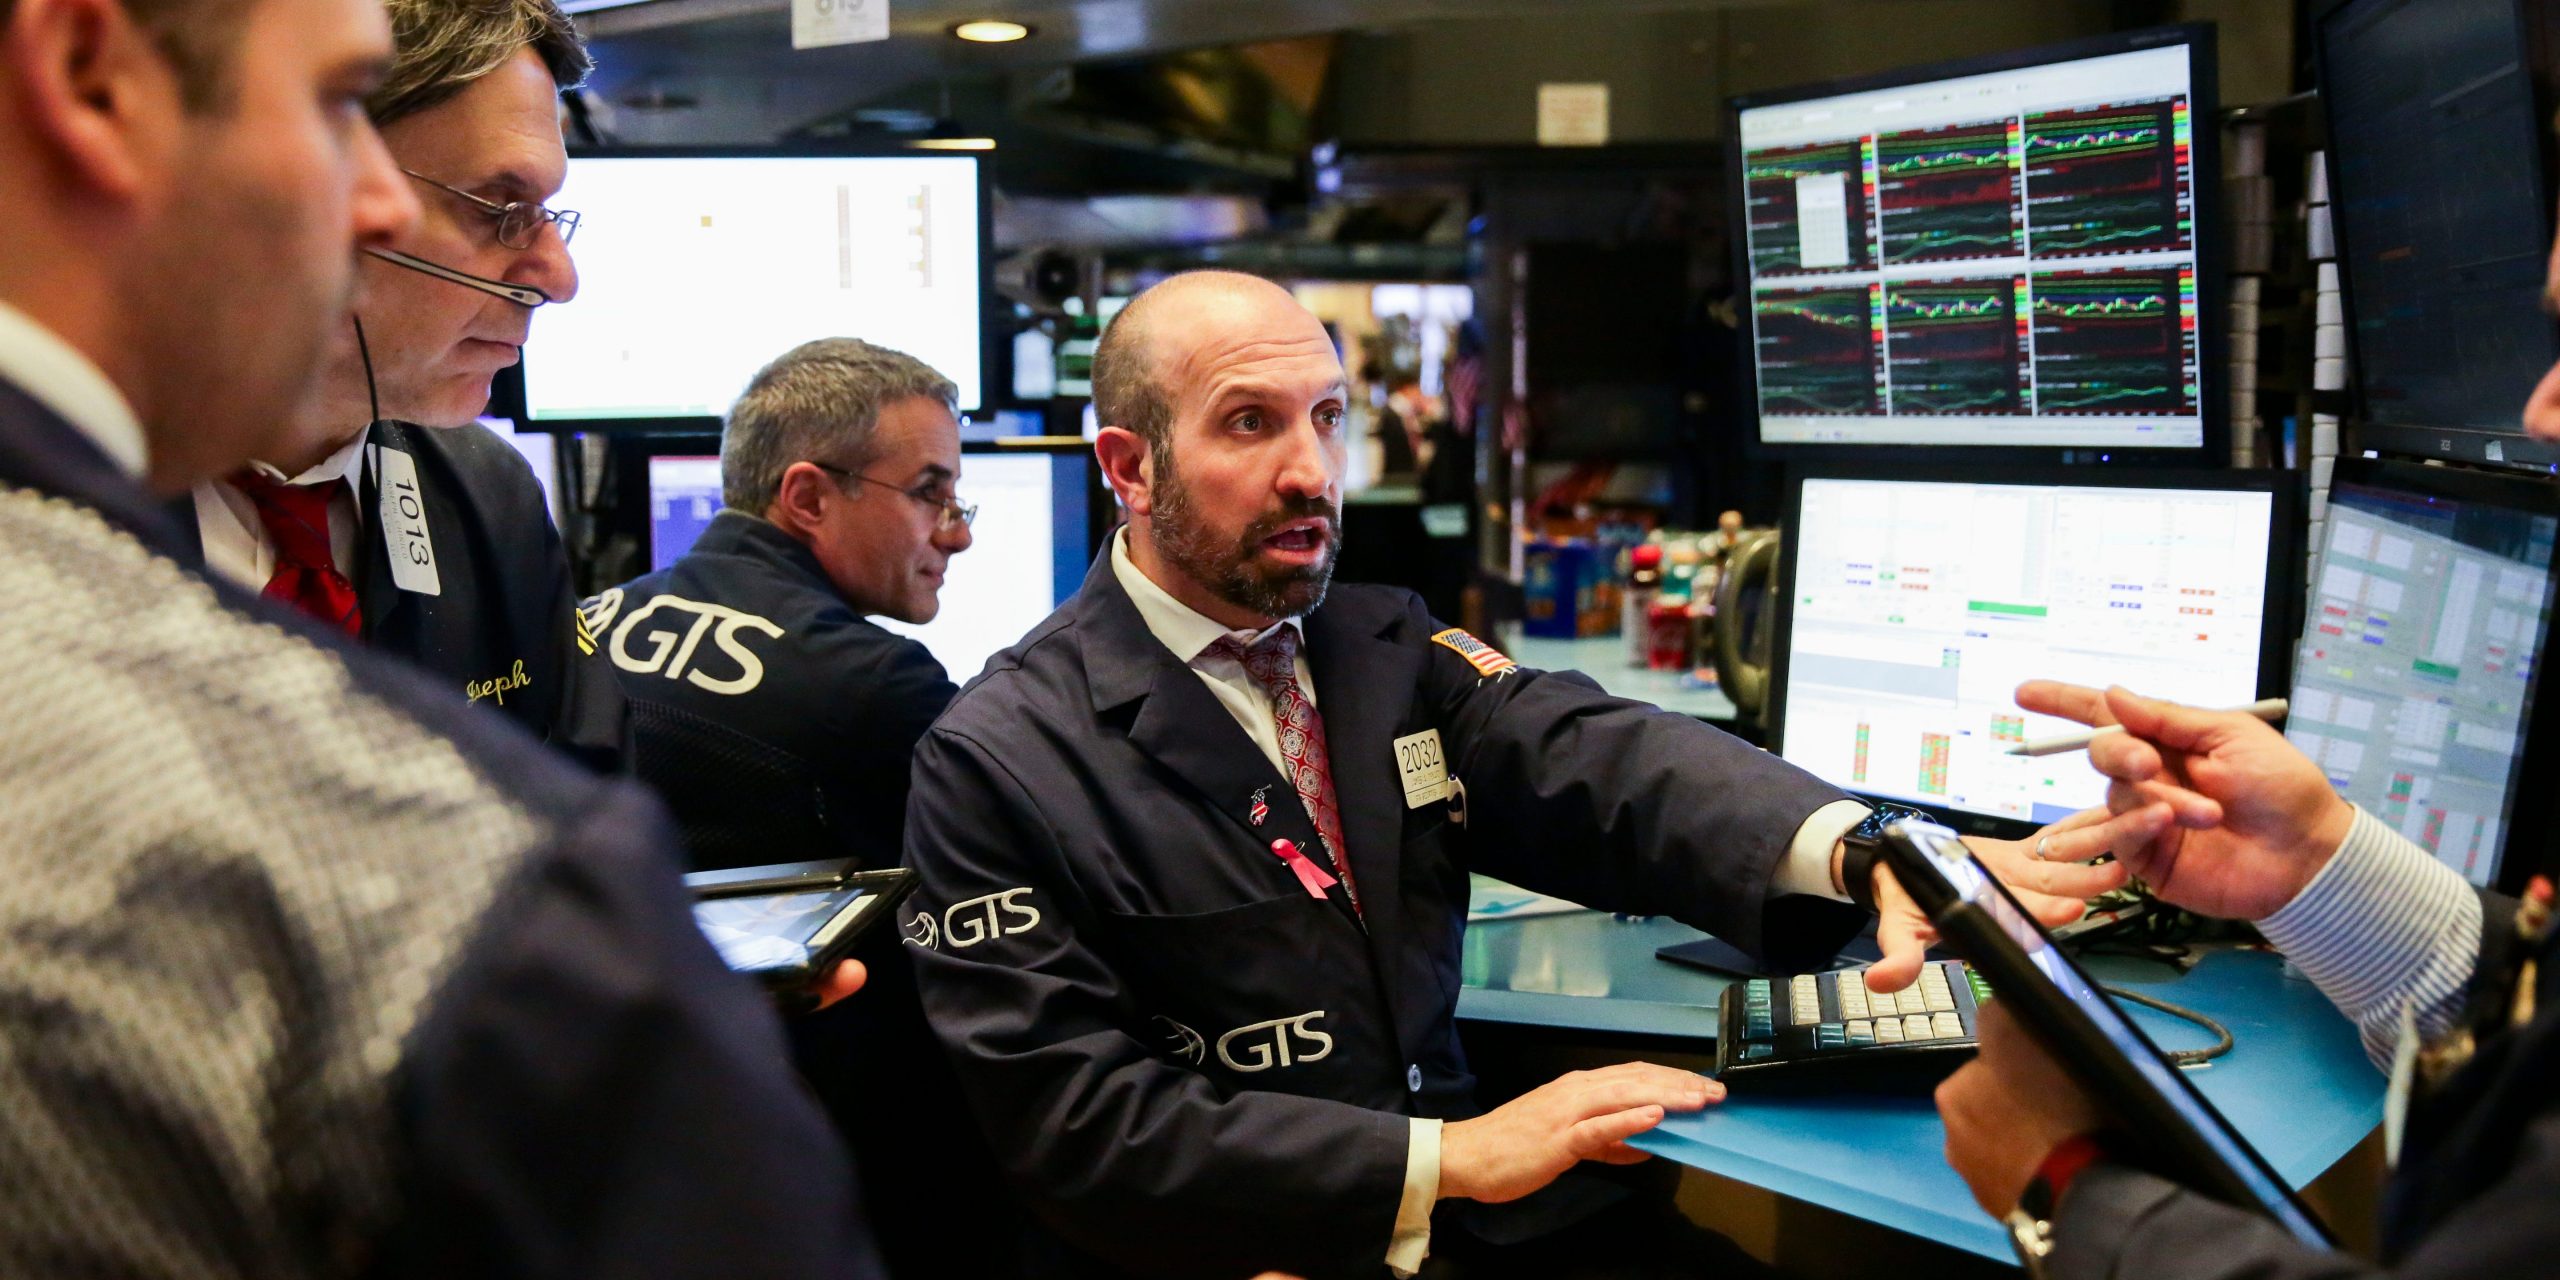 Traders work at the New York Stock Exchange in New York, the United States, Nov. 20, 2018.